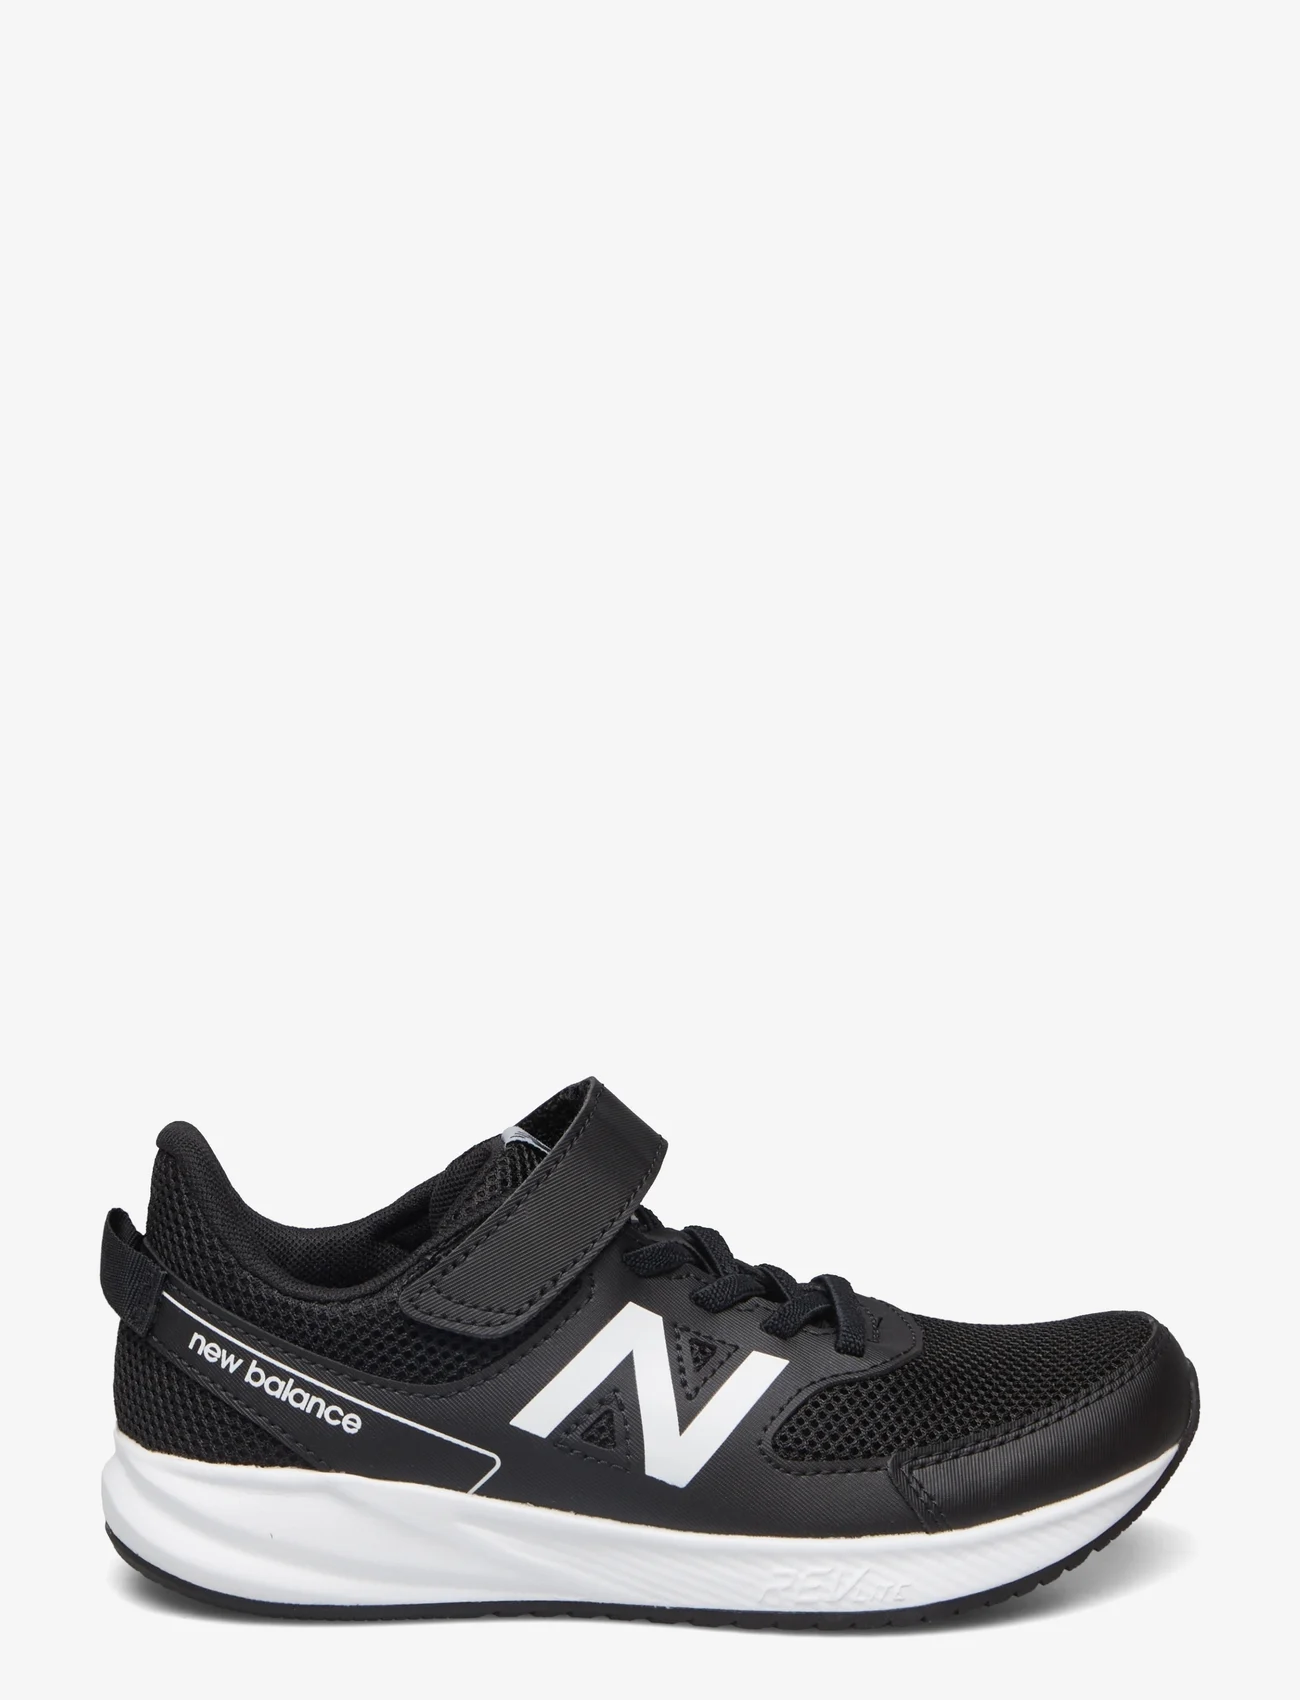 New Balance - New Balance 570 v3 Kids Bungee Lace with Hook & Loop Top Strap - kinder - black - 1